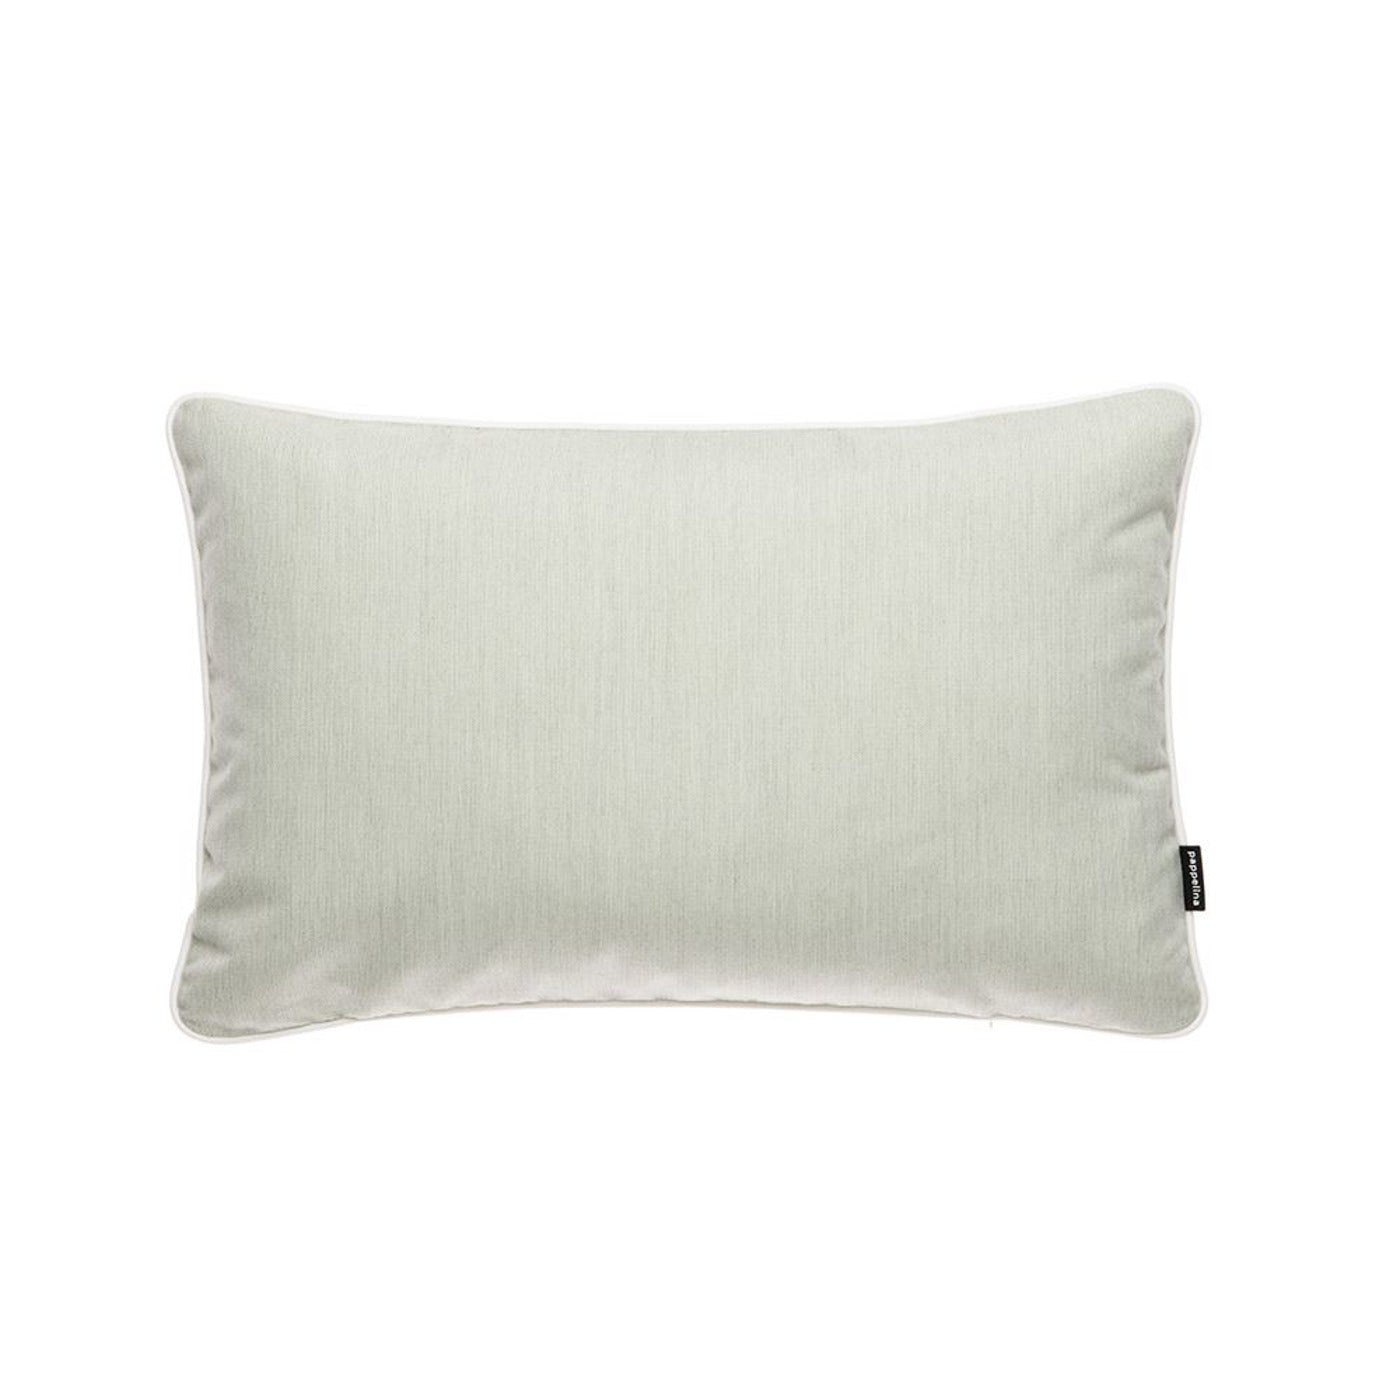 Pappelina Cushion / pillow for indoor and outdoor use SUNNY Mint